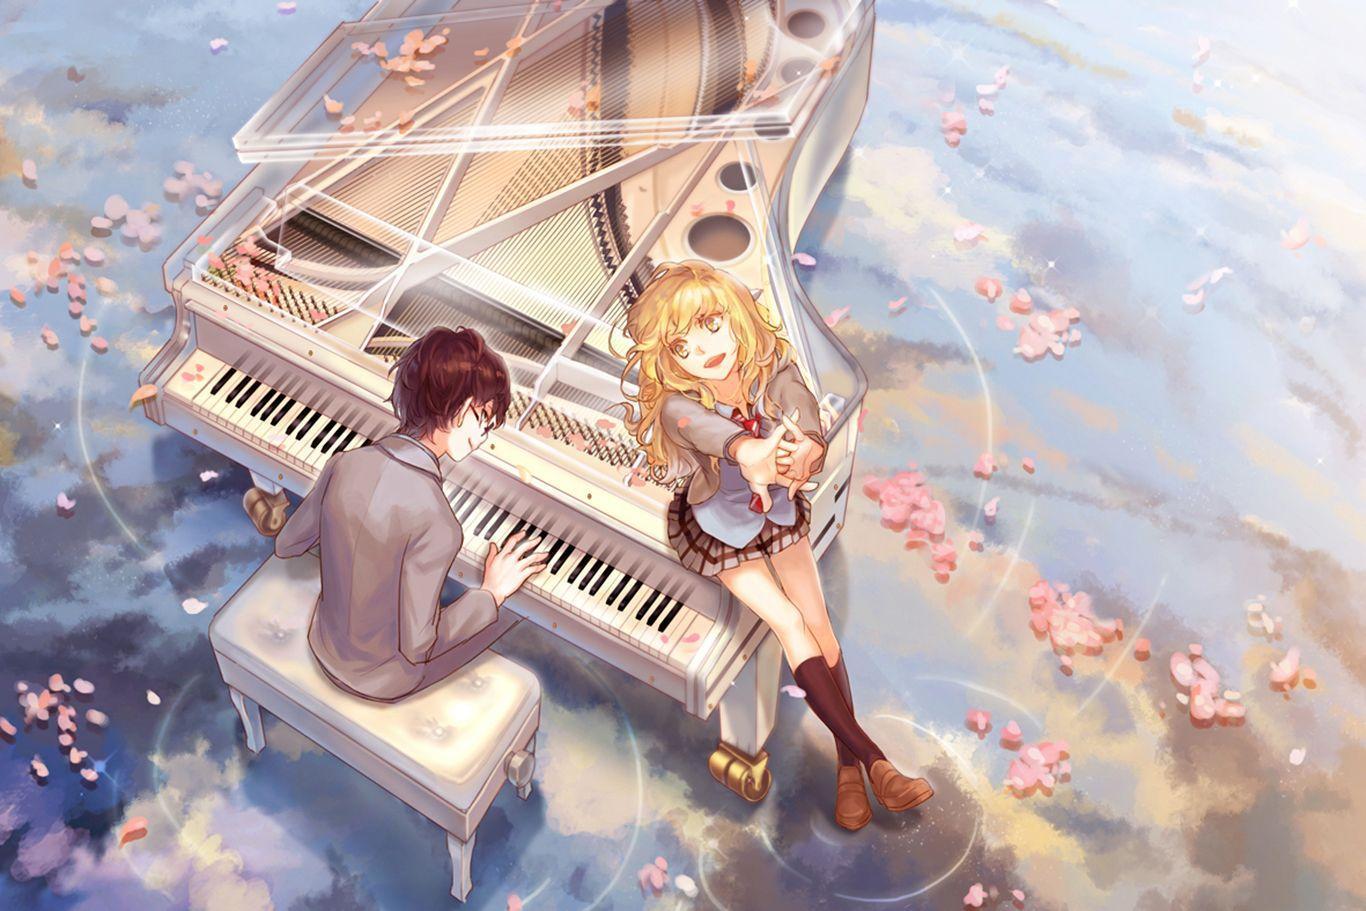 Your Lie In April 4K Ultra Hd Wallpapers, Your Lie In April, Anime